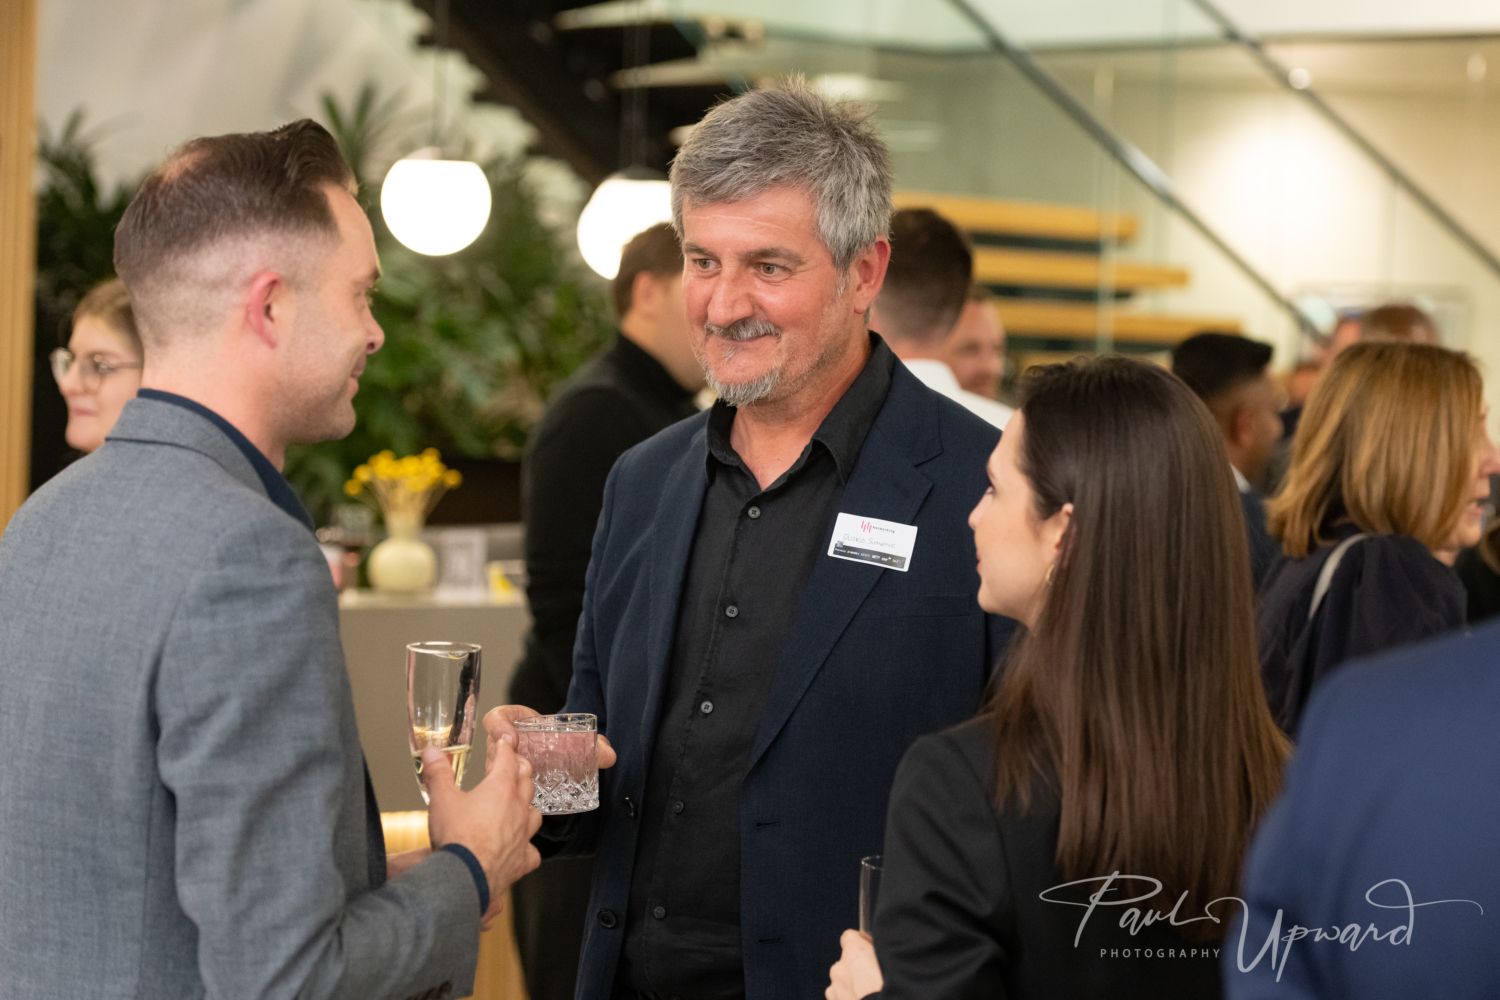 The Benefits of Networking for Small Business Owners